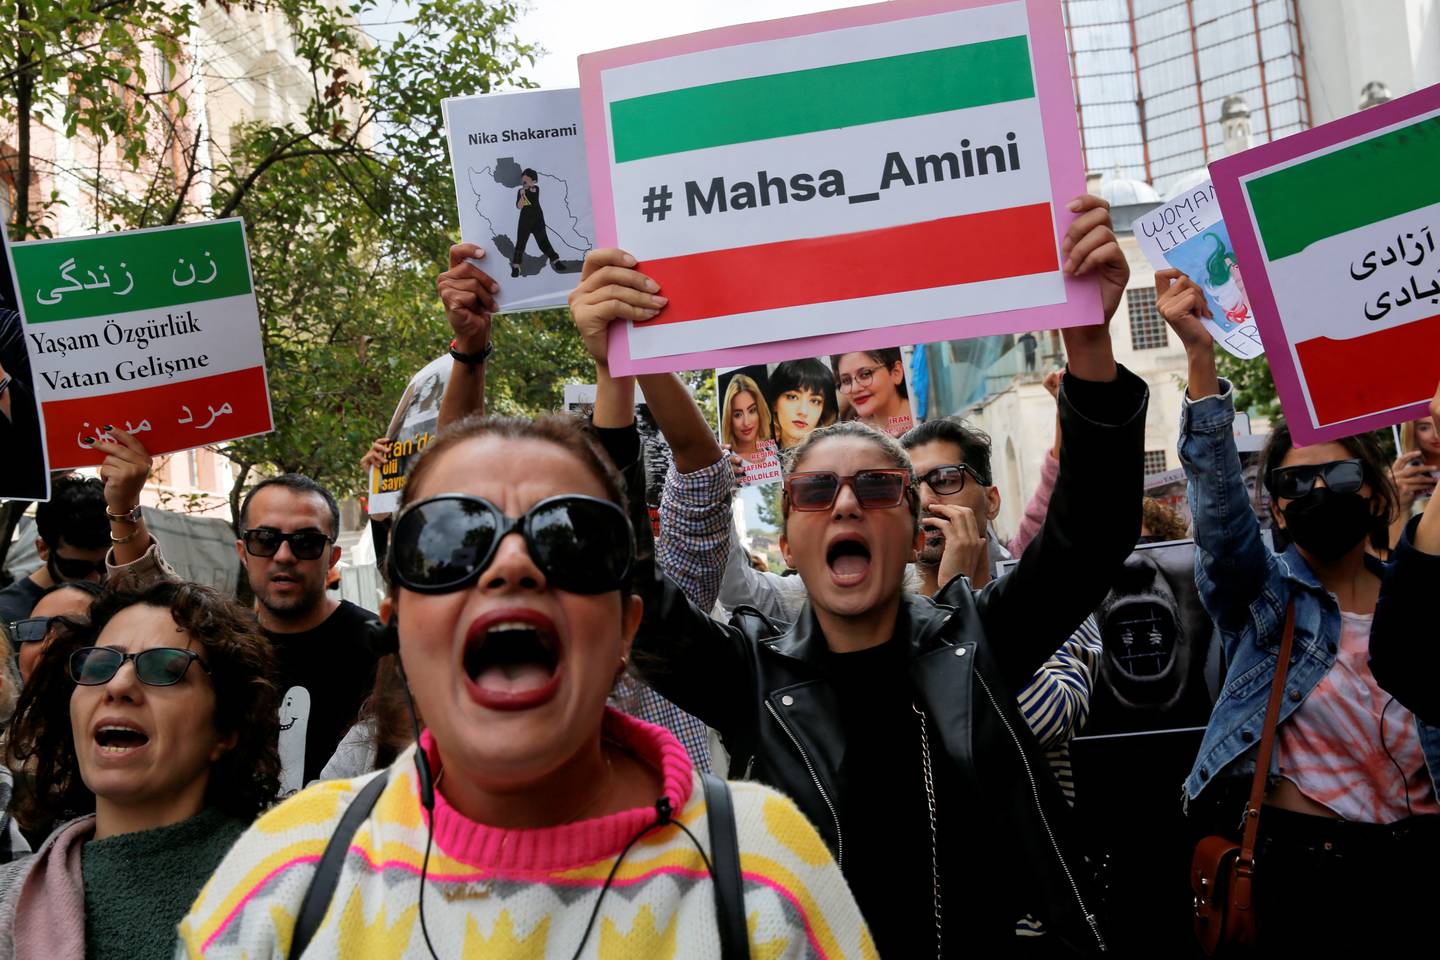 Women at a protest in Istanbul against Iran's regime following the death of Mahsa Amini. Reuters

